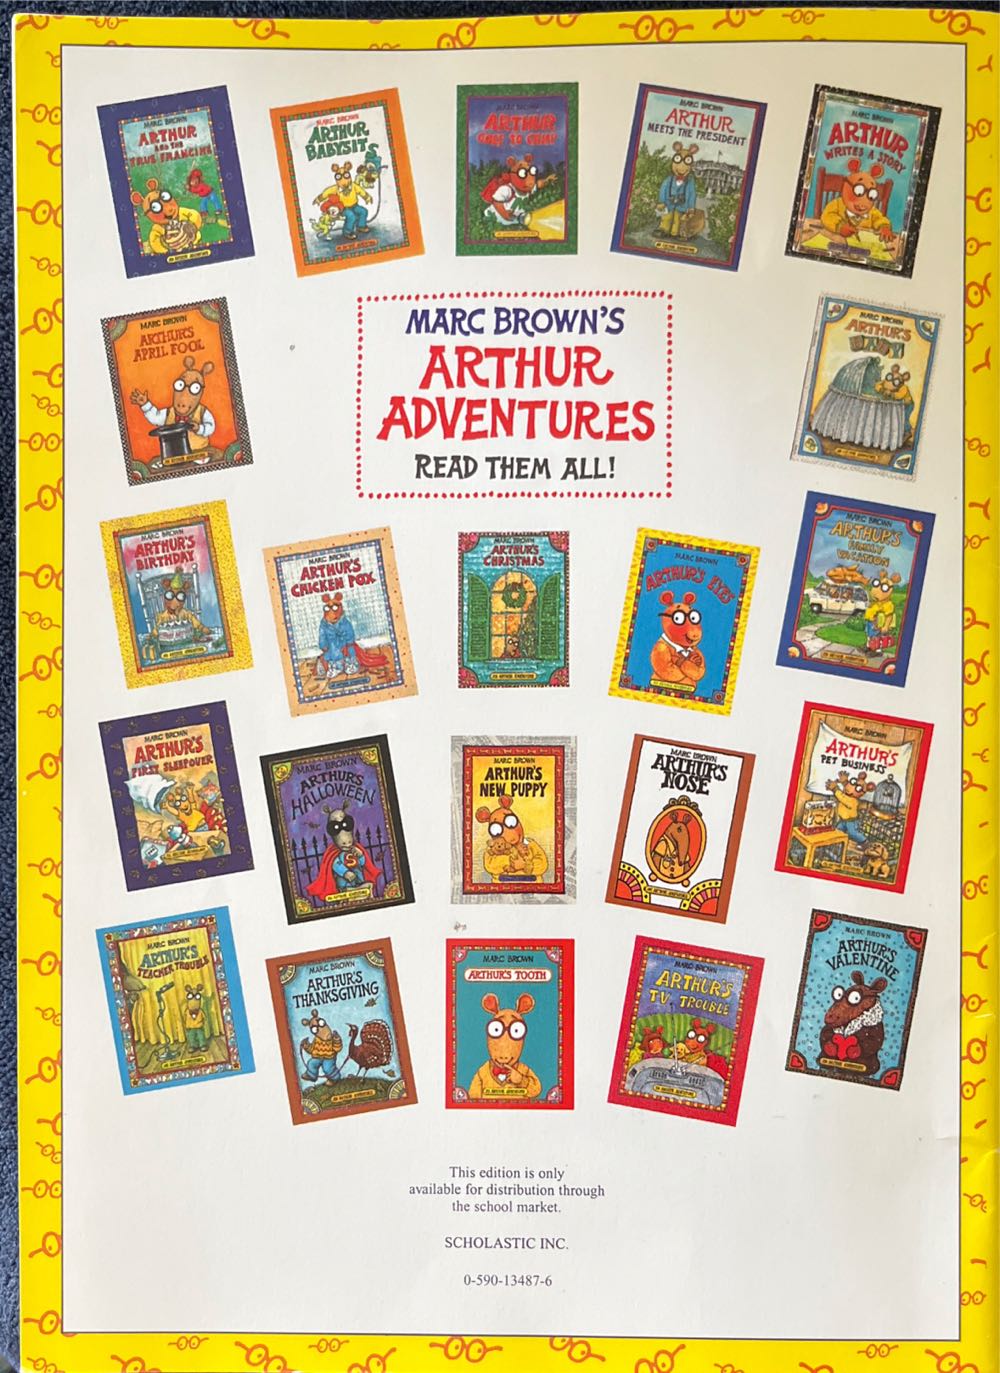 Arthur’s Eyes - Marc Brown (Scholastic Inc. - Paperback) book collectible [Barcode 9780590134873] - Main Image 2